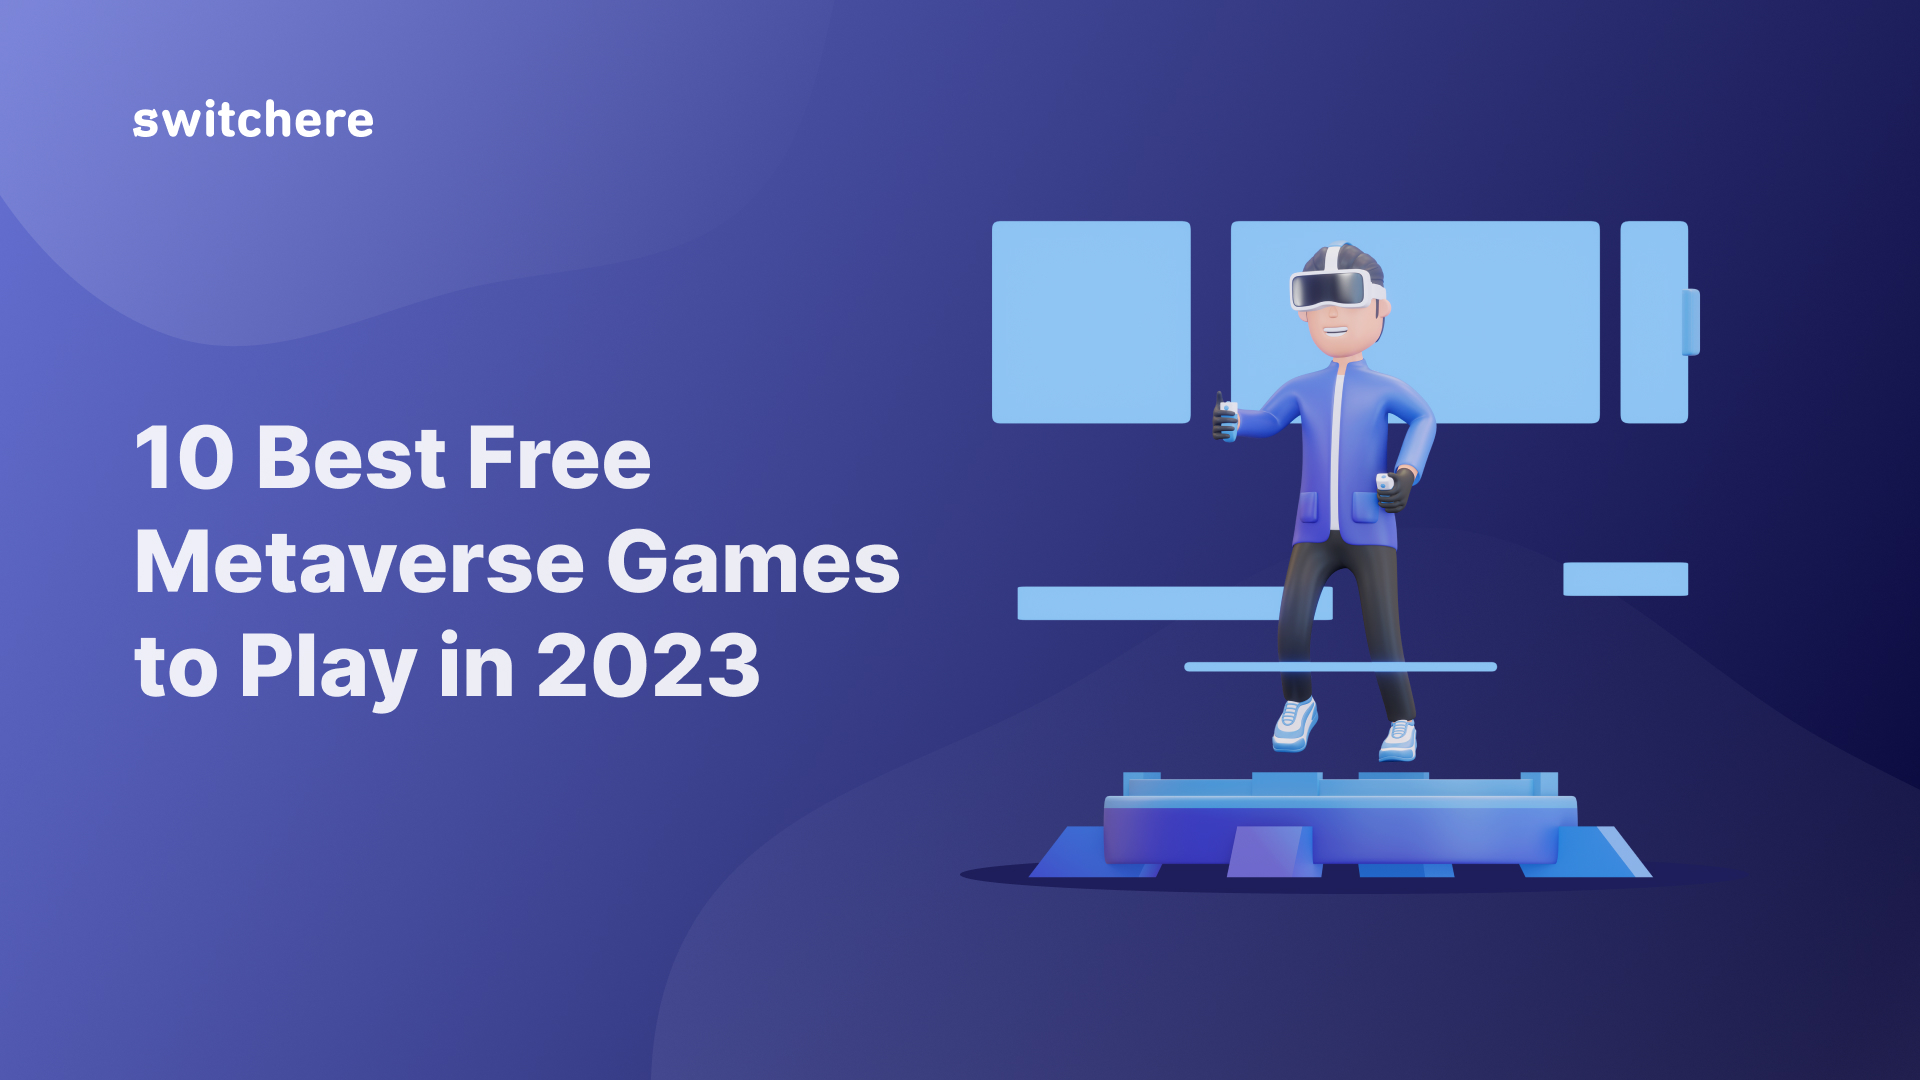 10 Best Free Metaverse Games to Play in 2023